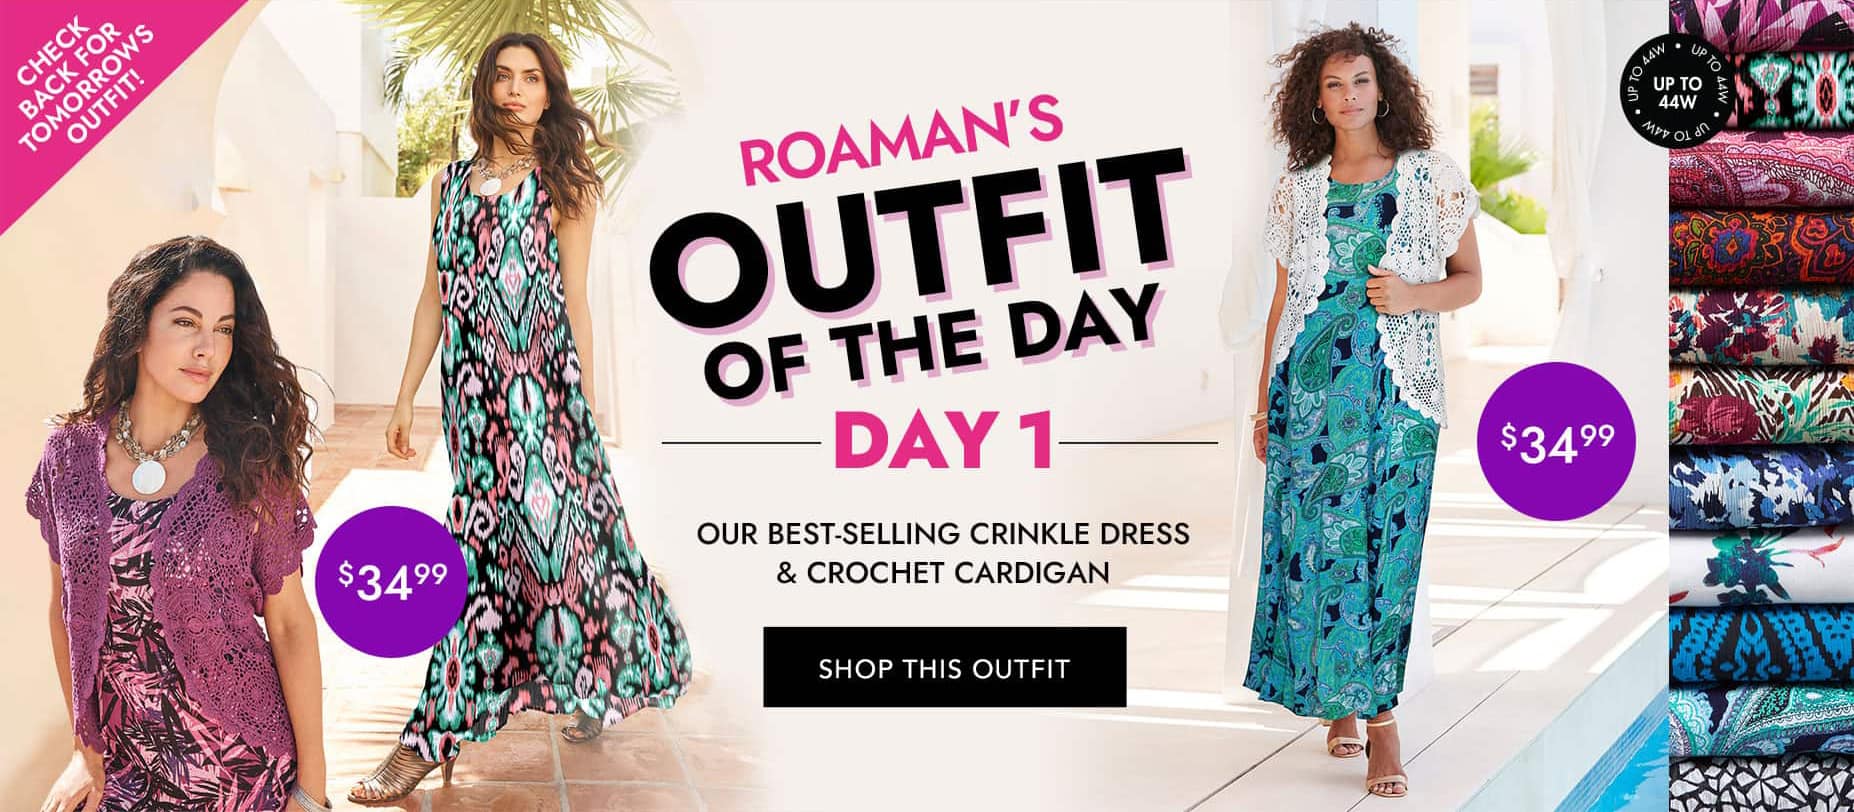 Today Only! SHOP THIS OUTFIT